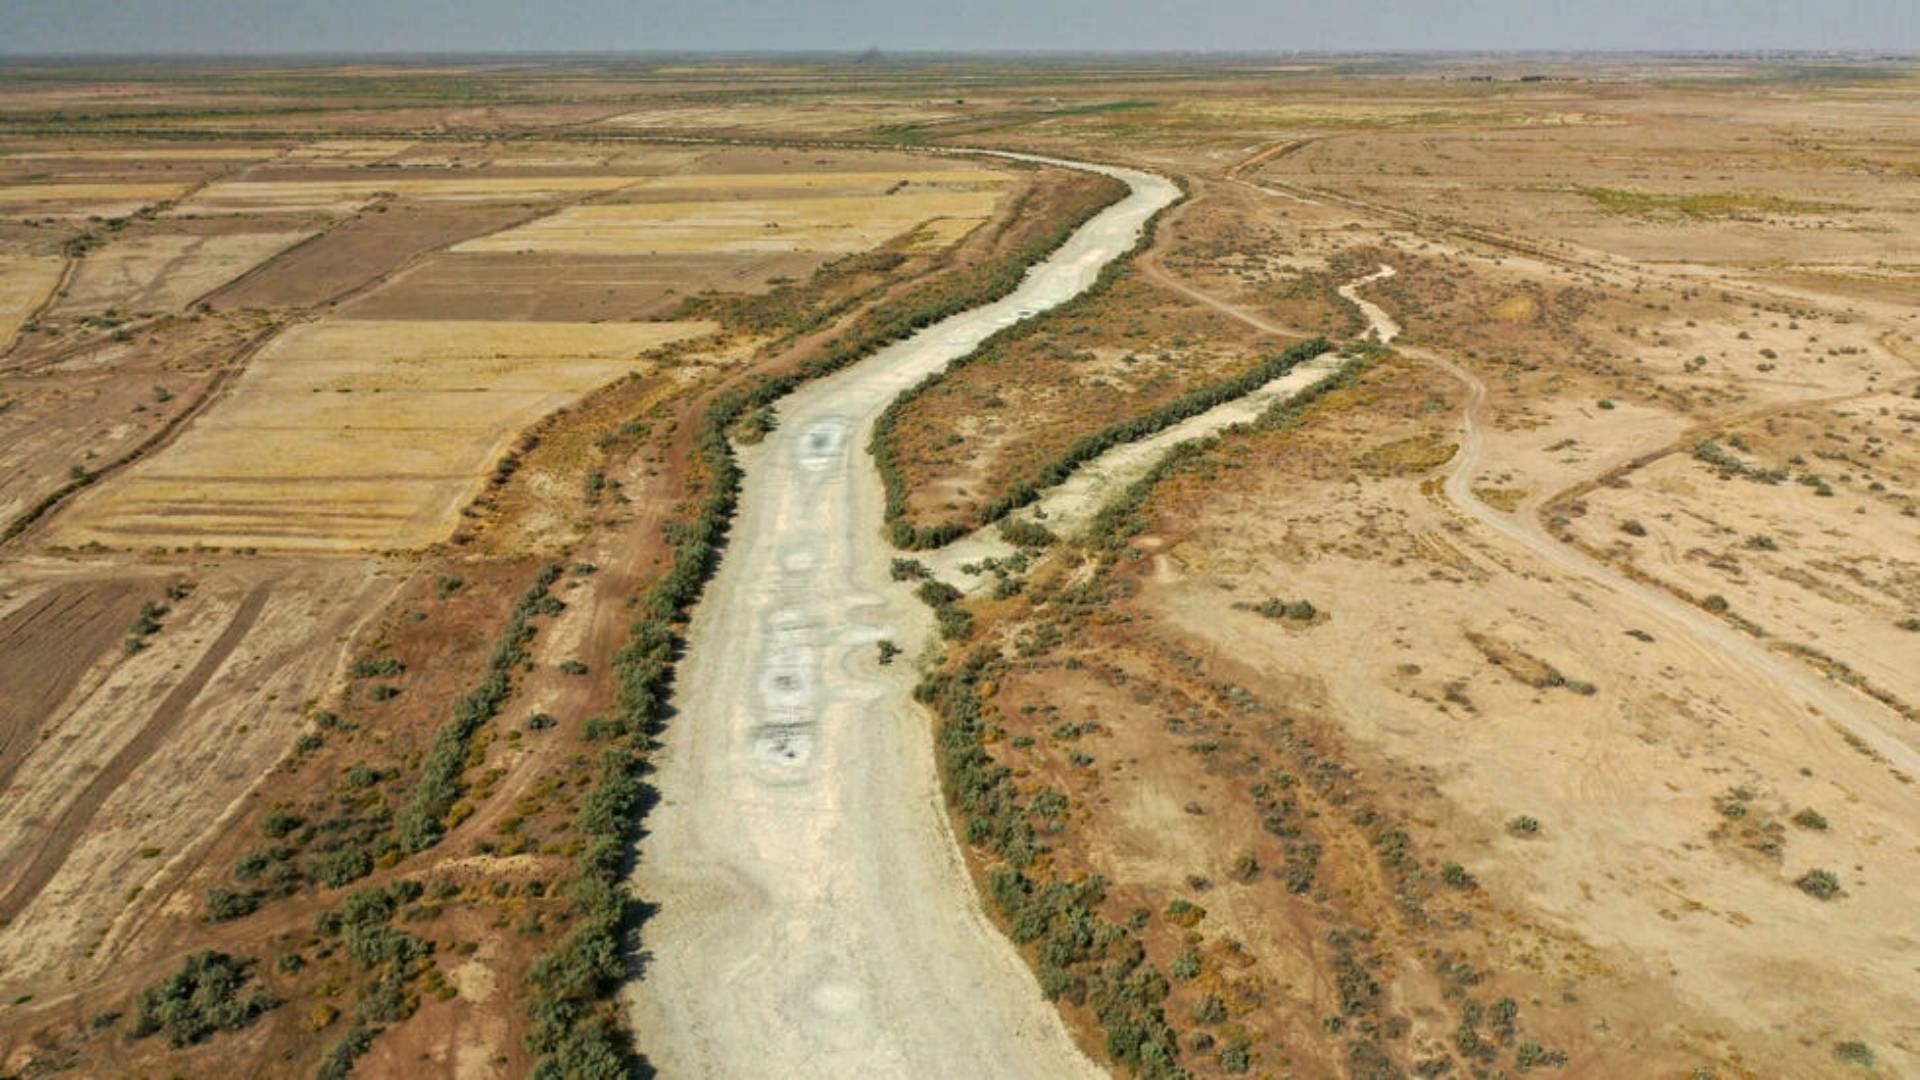  An aerial view taken on September 24, 2021 shows a dried up river bed in the Al-Huwaiza marshes on Iraq's border with Iran Asaad NIAZI AFP/File